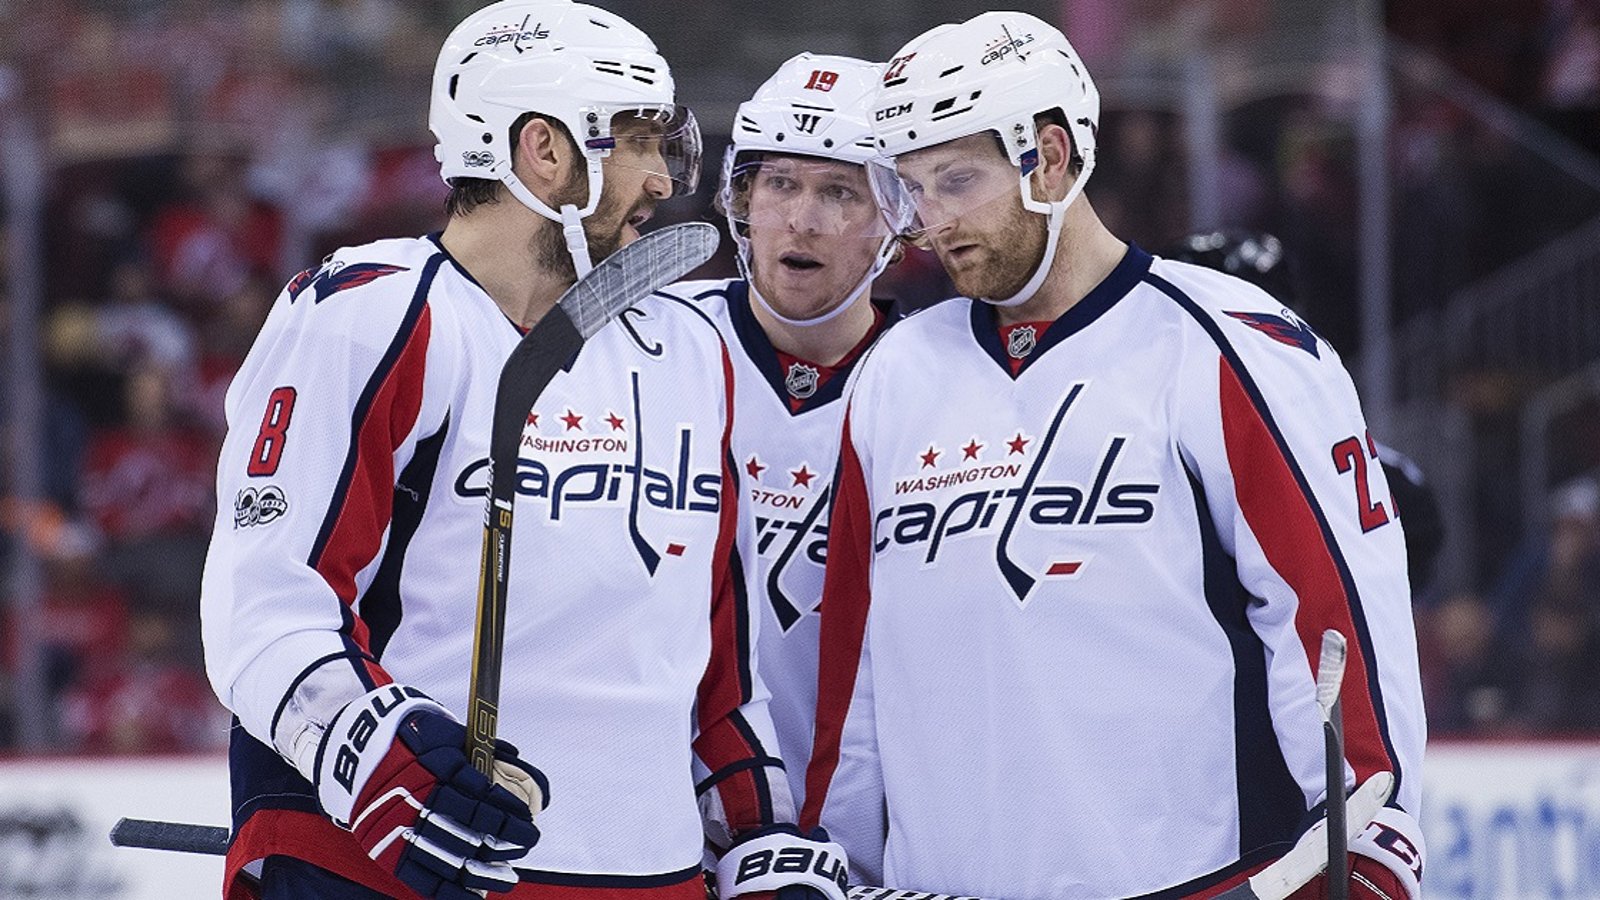 Breaking: The Capitals have demoted Alex Ovechkin before an elimination game!